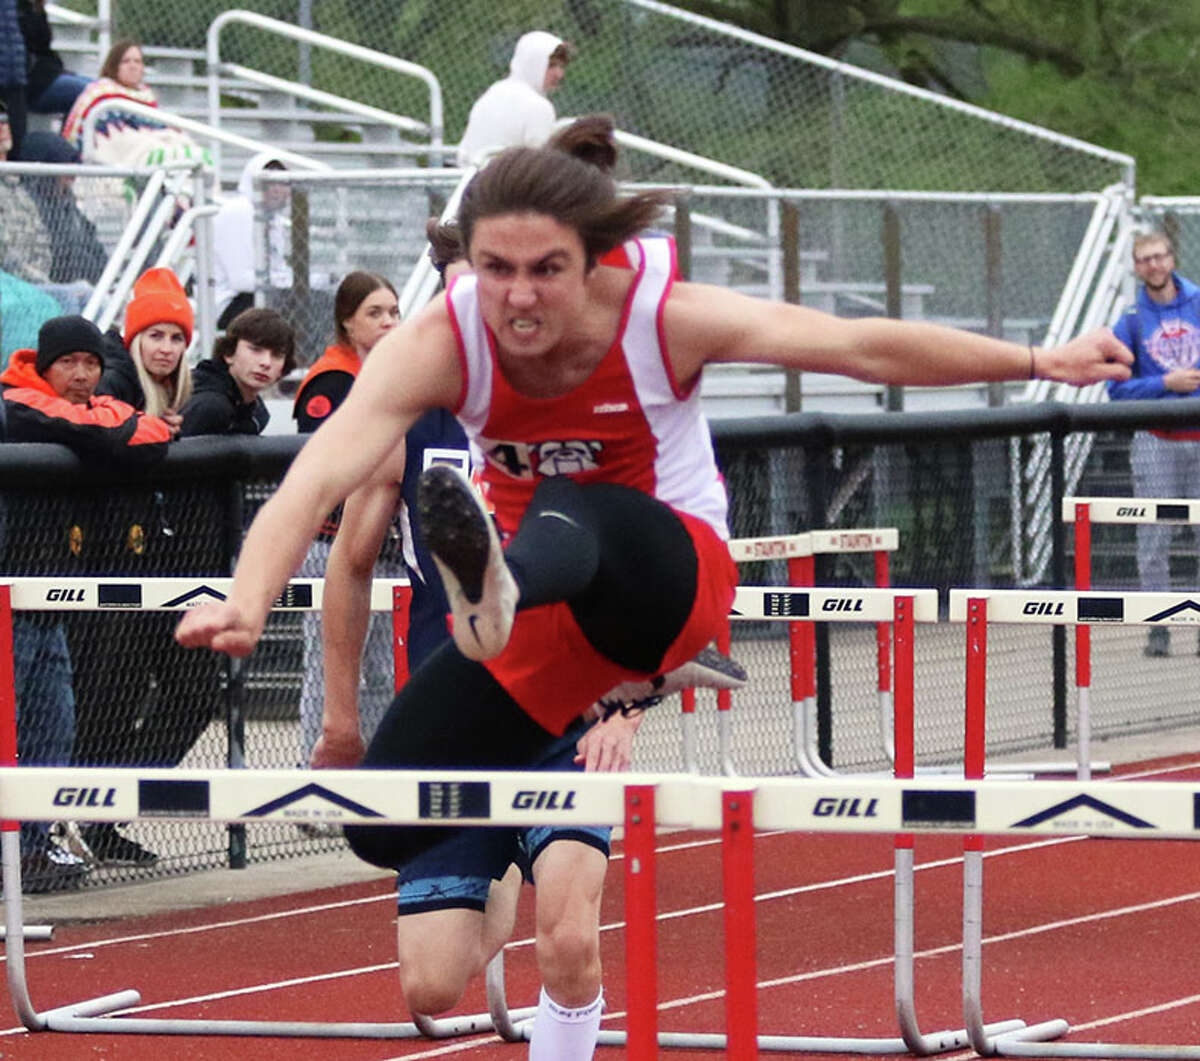 Staunton's Drake Dufrain's state meet ended without a race when a false start in the 110-meter high hurdles led to his DQ in Thursday's Class 1A preliminaries in Charleston. He is shown winning the 110 hurdles at the SCC Meet earlier this season.